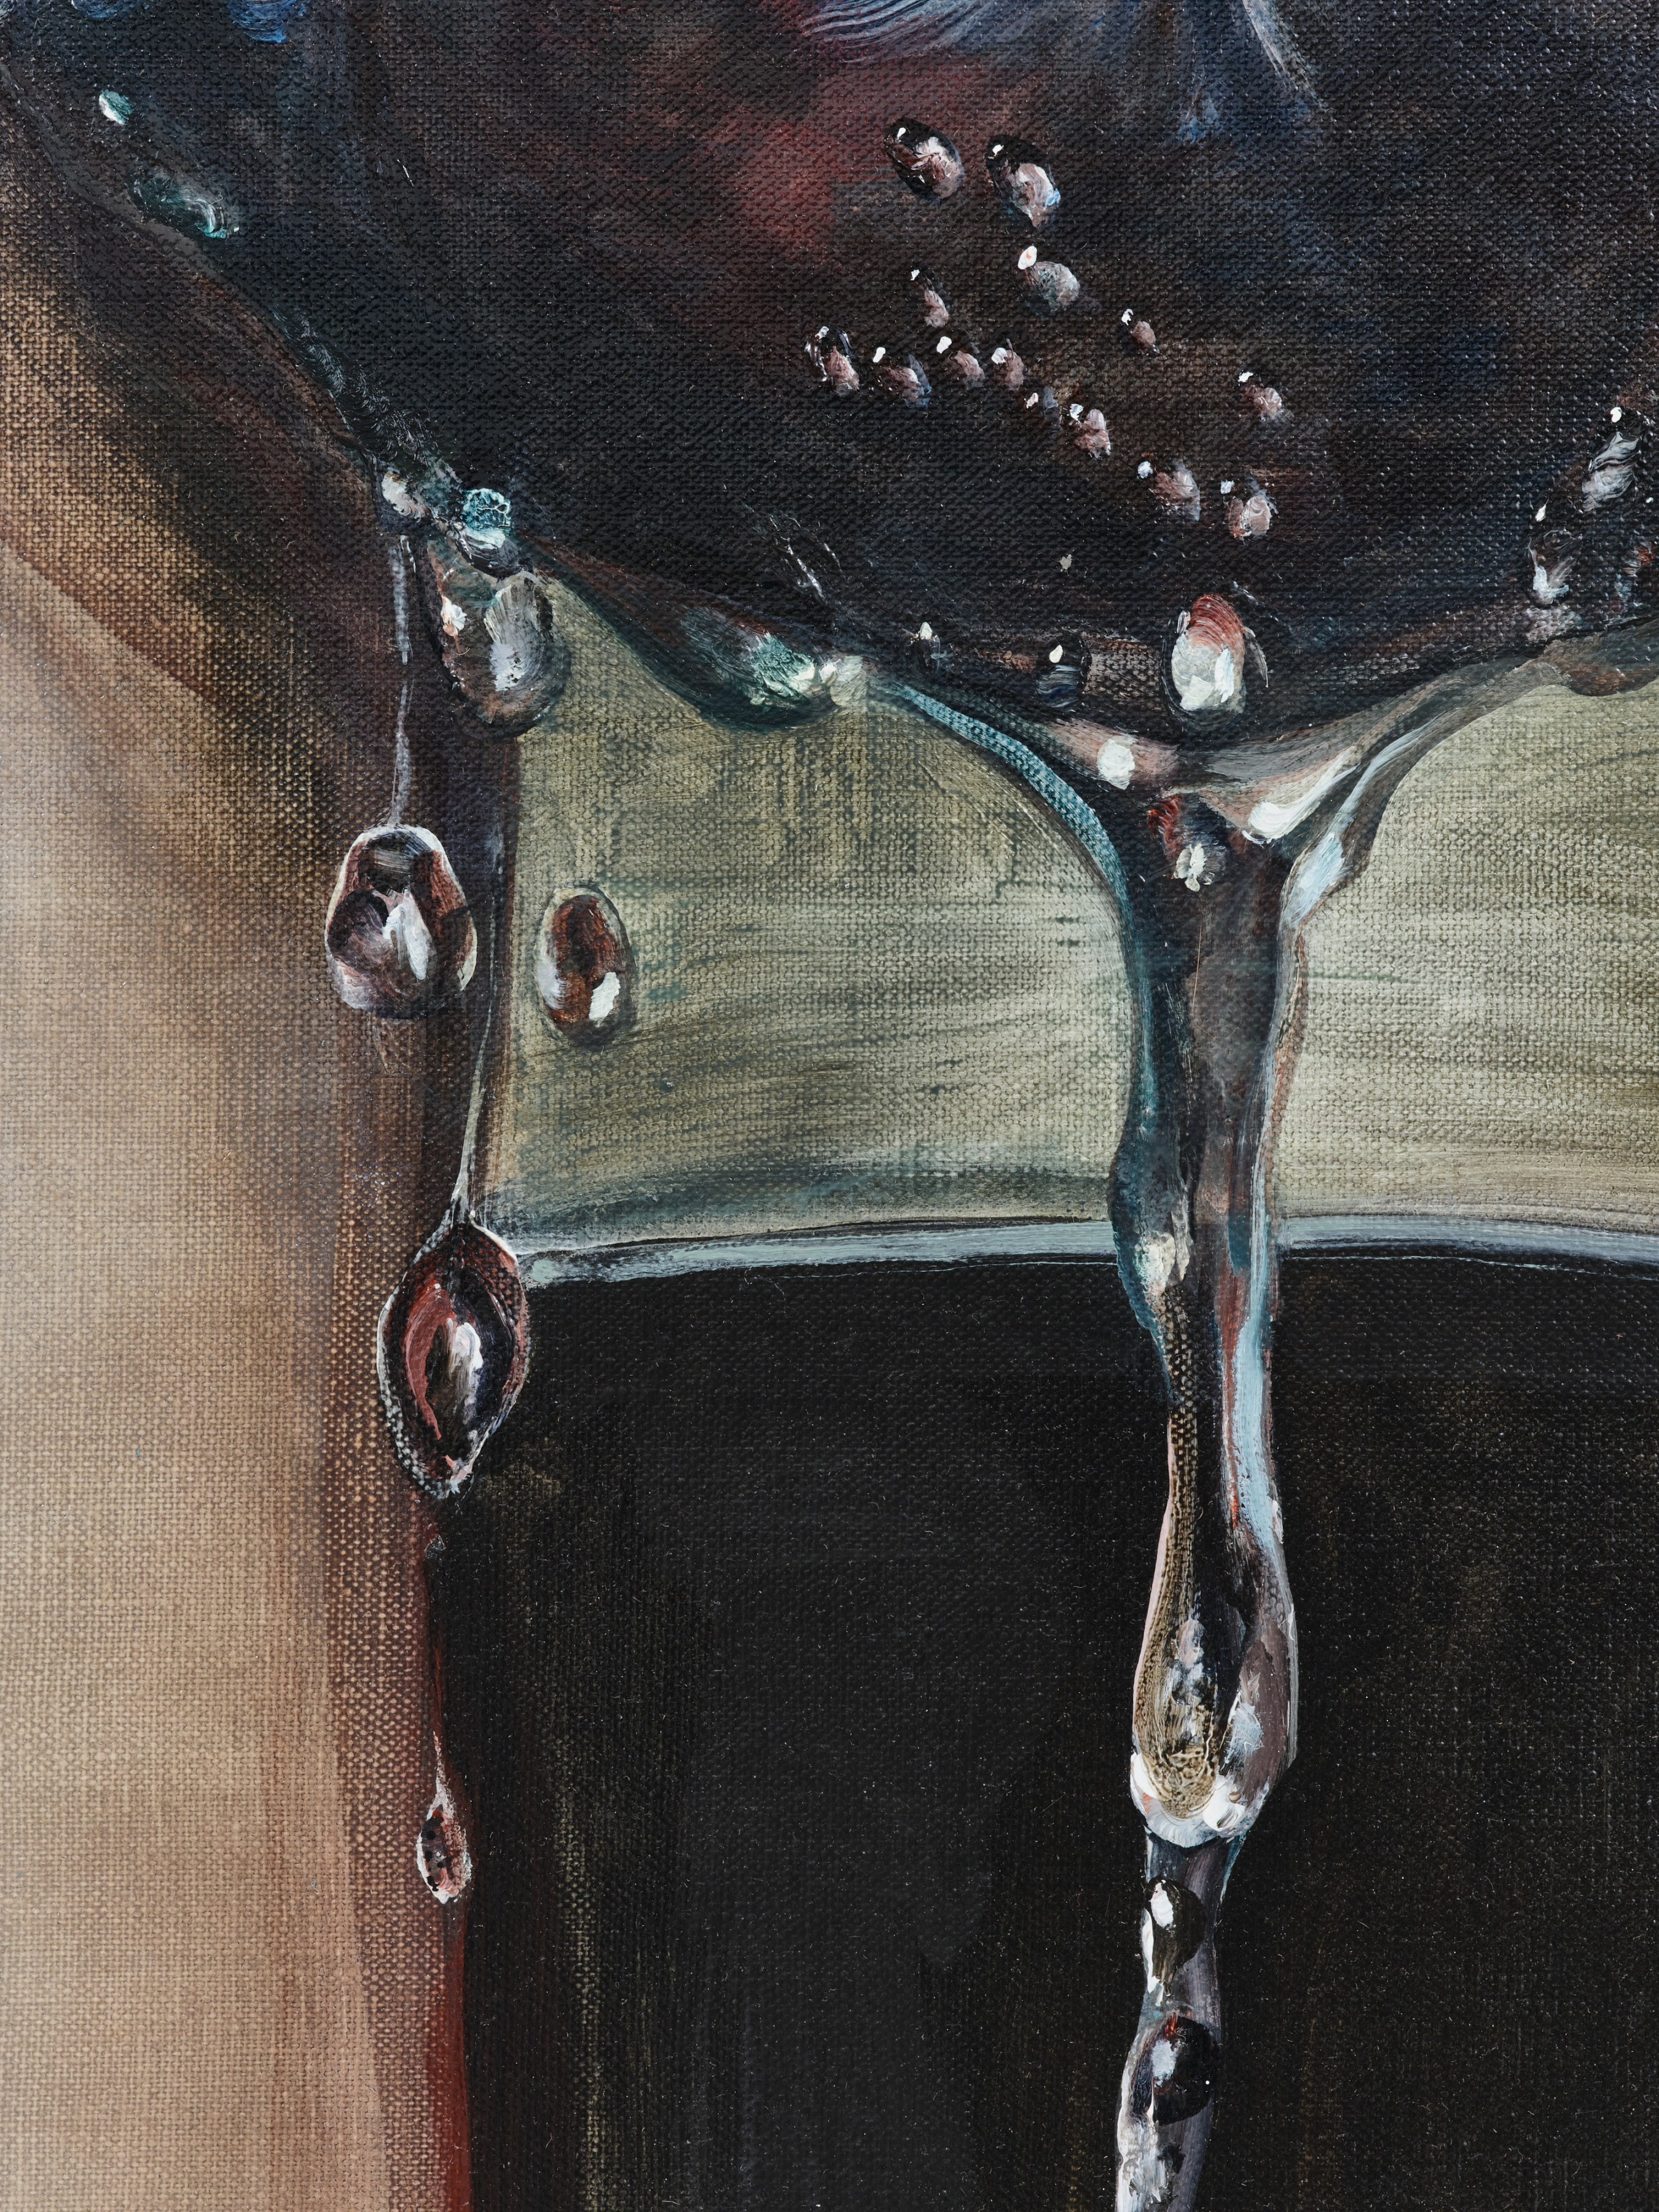 Detail of the drips falling off the apple in "Golden Delicious"